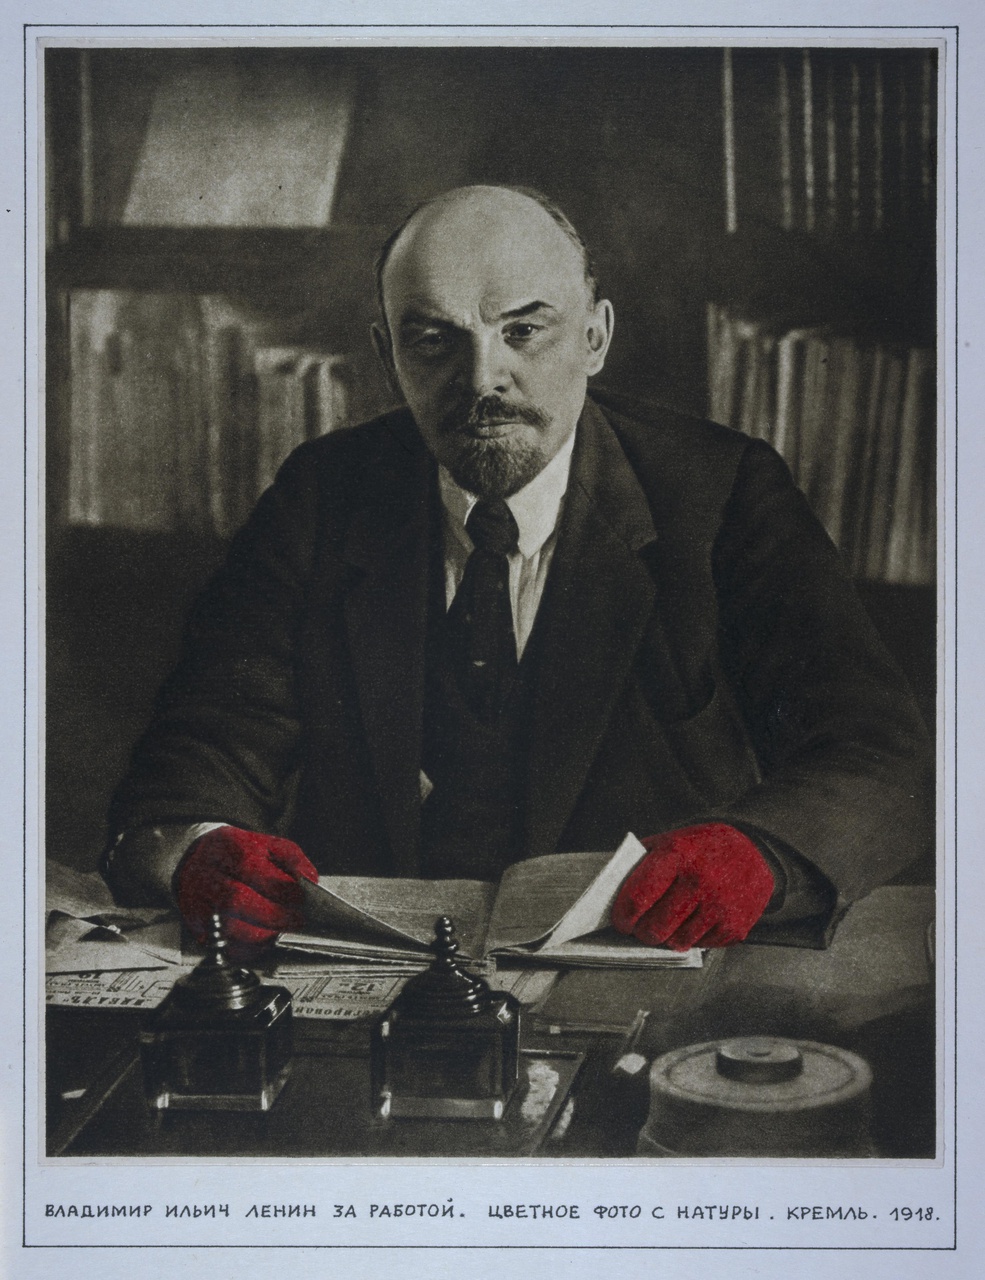 Lenin with red hands